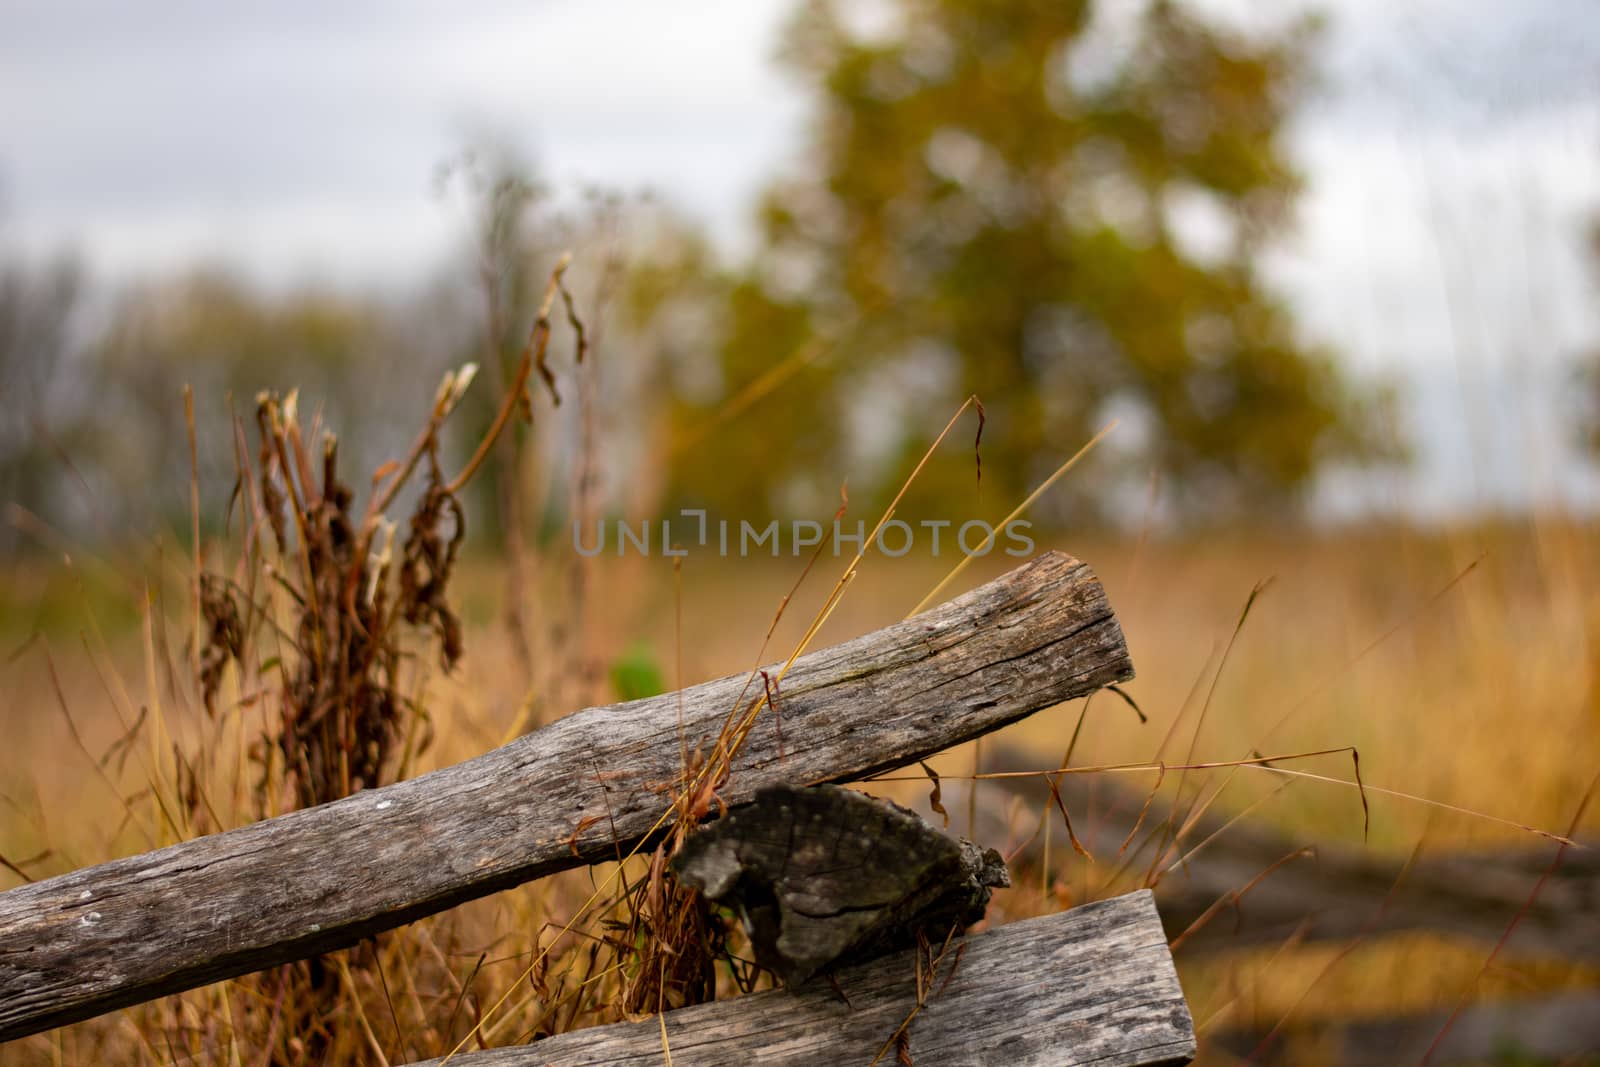 A Simple Wooden Fence With an Orange Field Behind It by bju12290